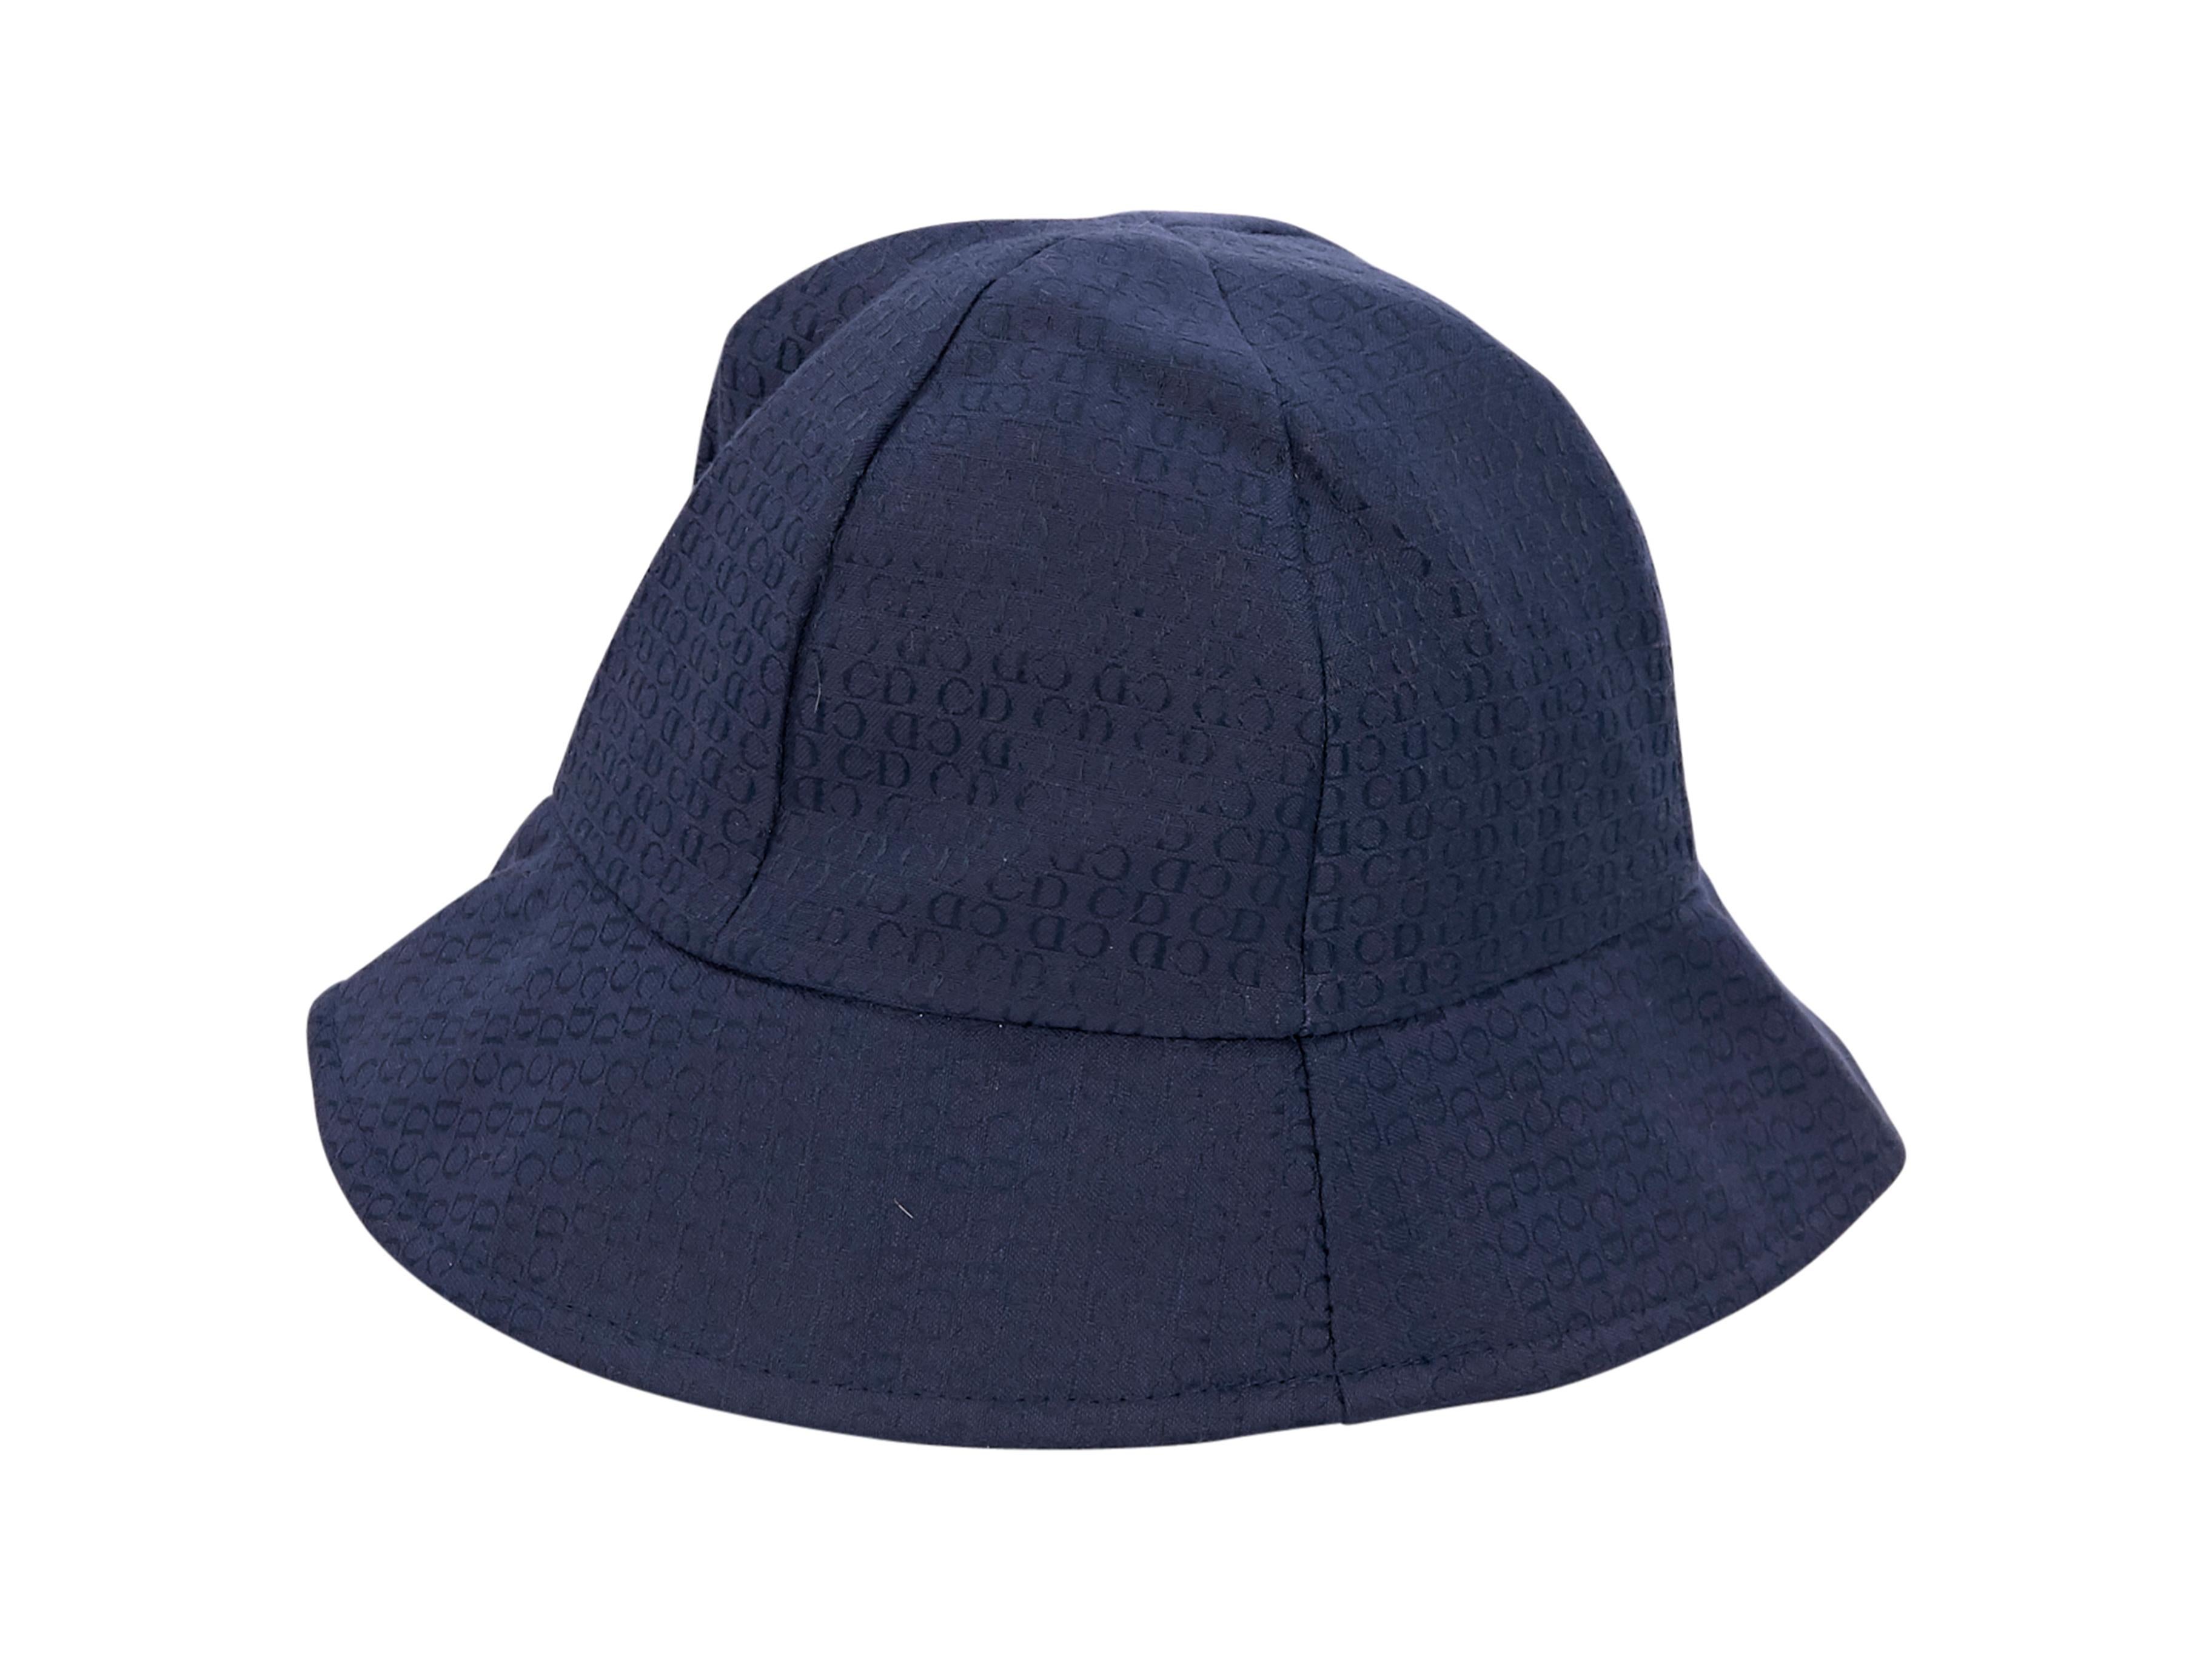 Product details:  Vintage Navy blue logo bucket hat by Christian Dior.  Lined interior.  22